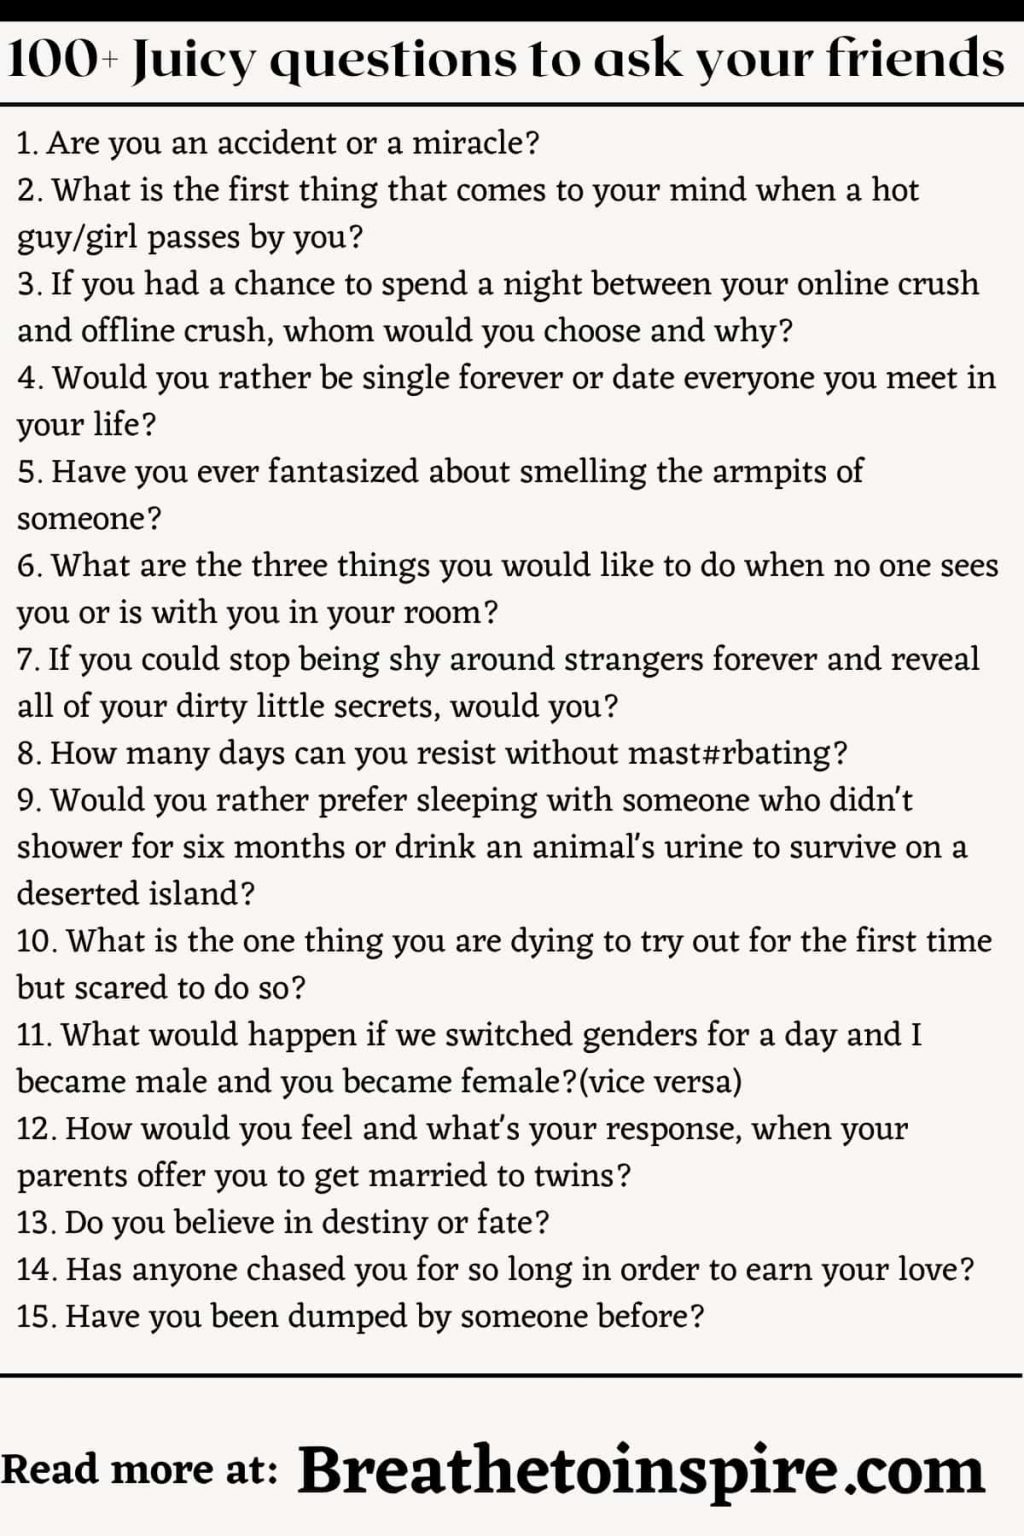 Juicy Questions To Ask Your Friends 100 1024x1536 